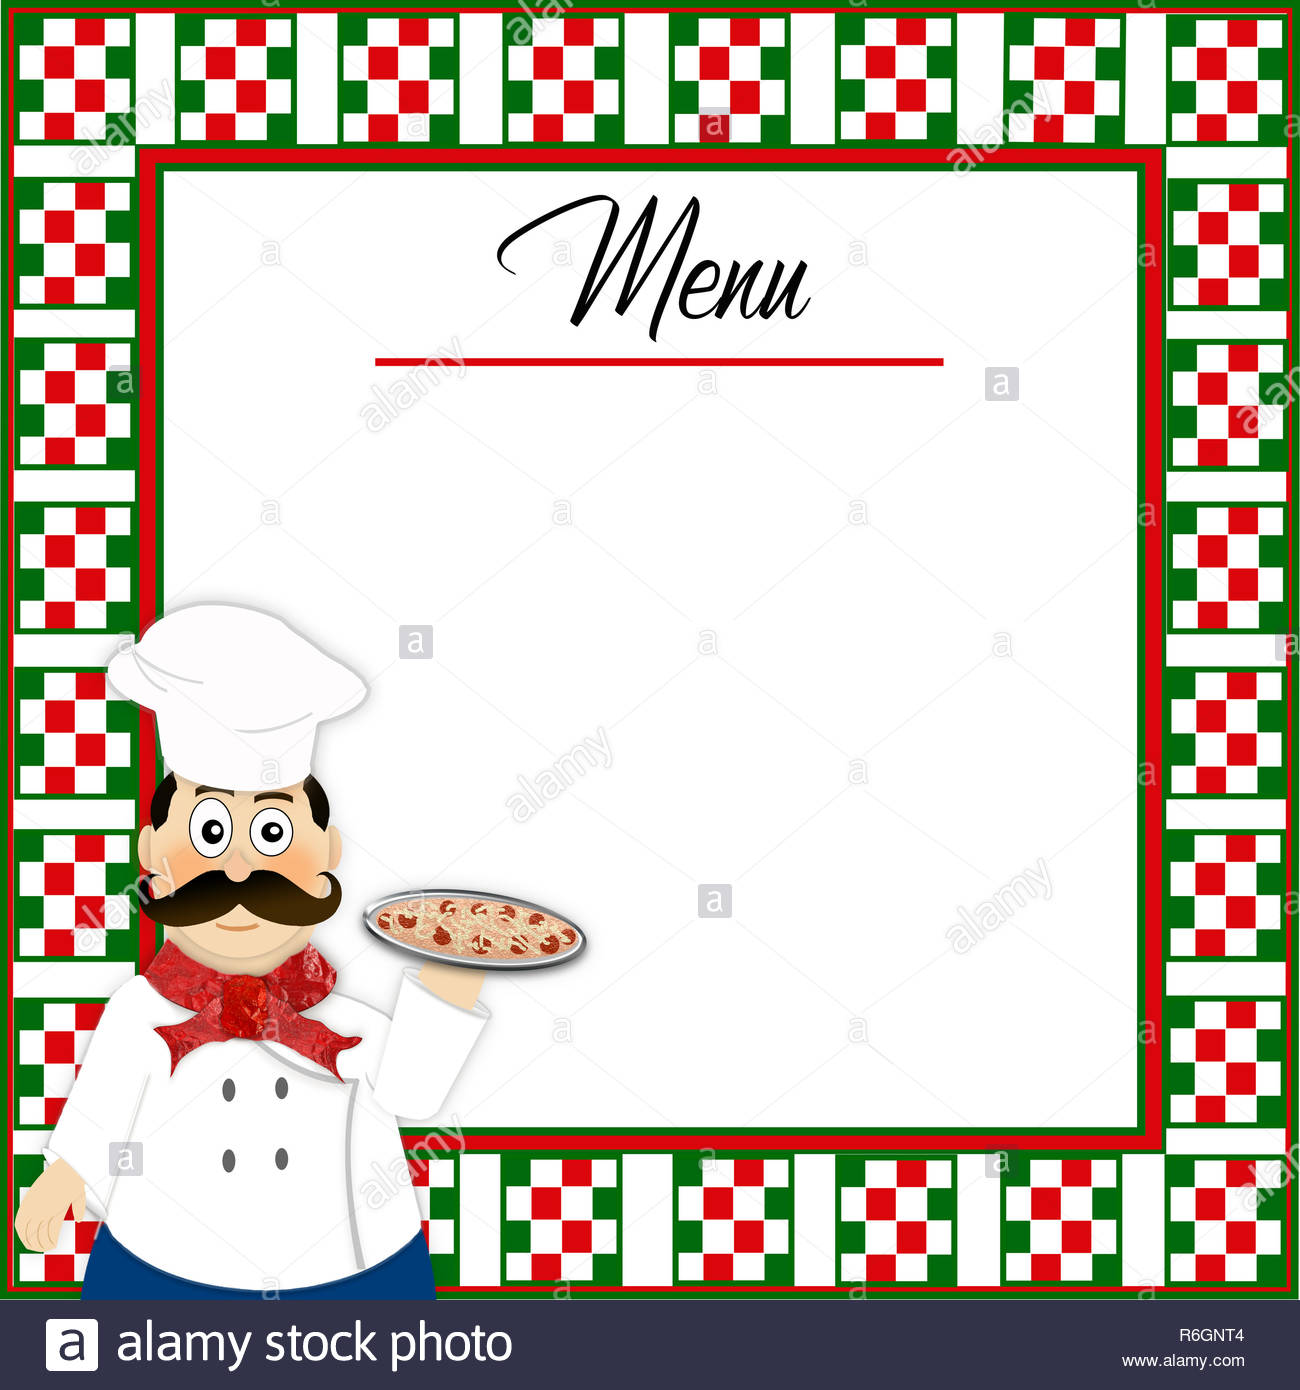 Italian backgrounds with a red green and white checkered border